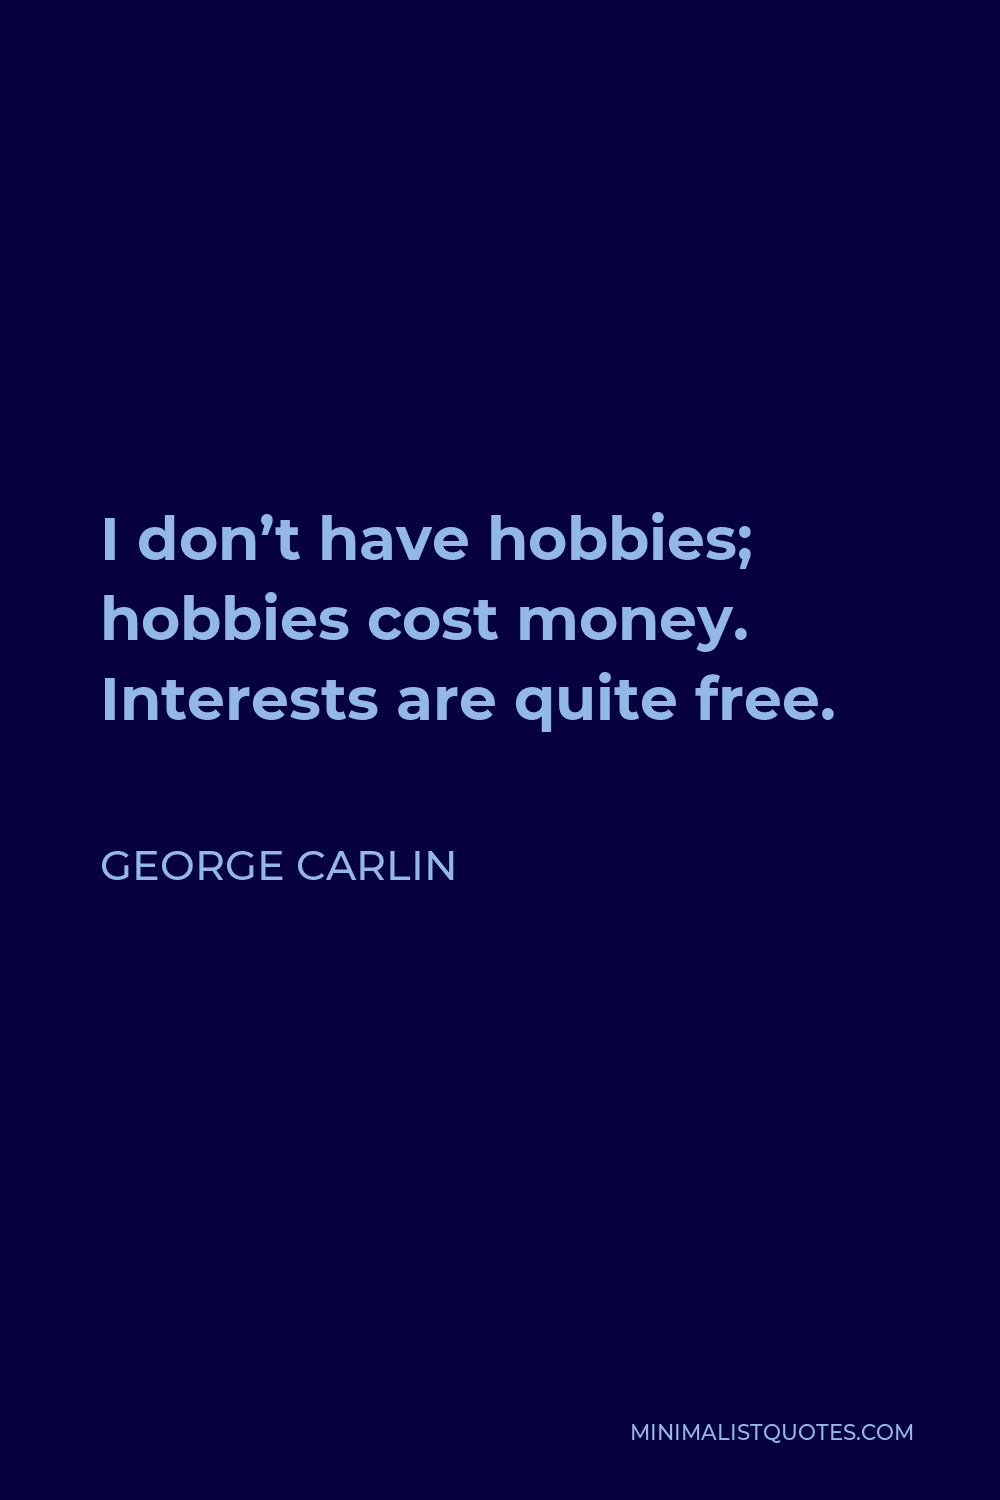 George Carlin Quote - I don’t have hobbies; hobbies cost money. Interests are quite free.